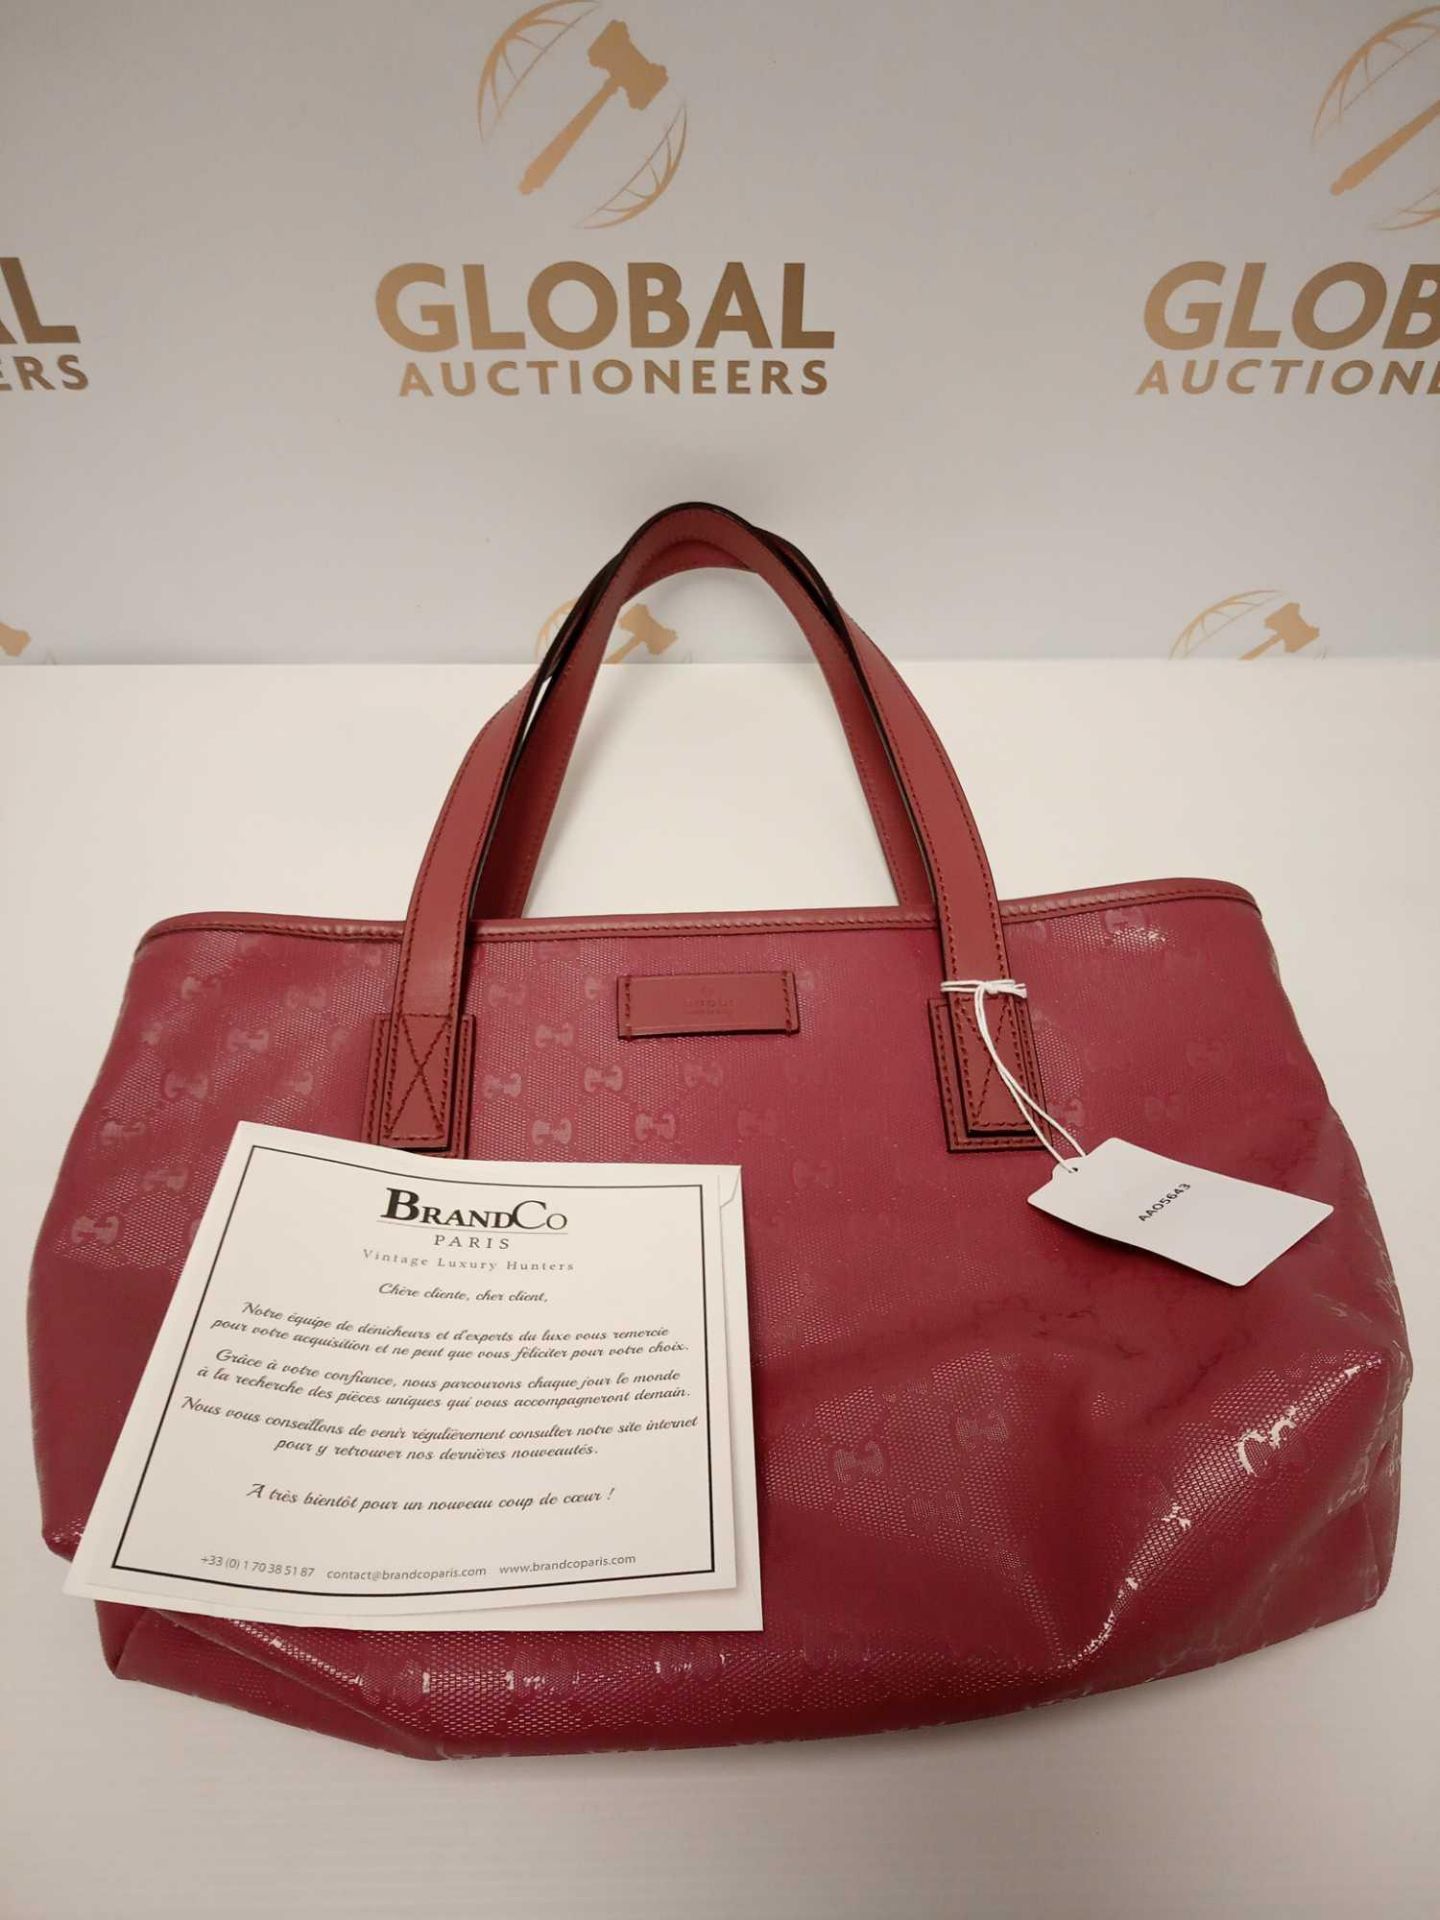 RRP £950 Gucci Rosewood Pink Coated Canvas Guccissima Imprint Tote Bag Aao5643, Grade A ( - Image 3 of 5